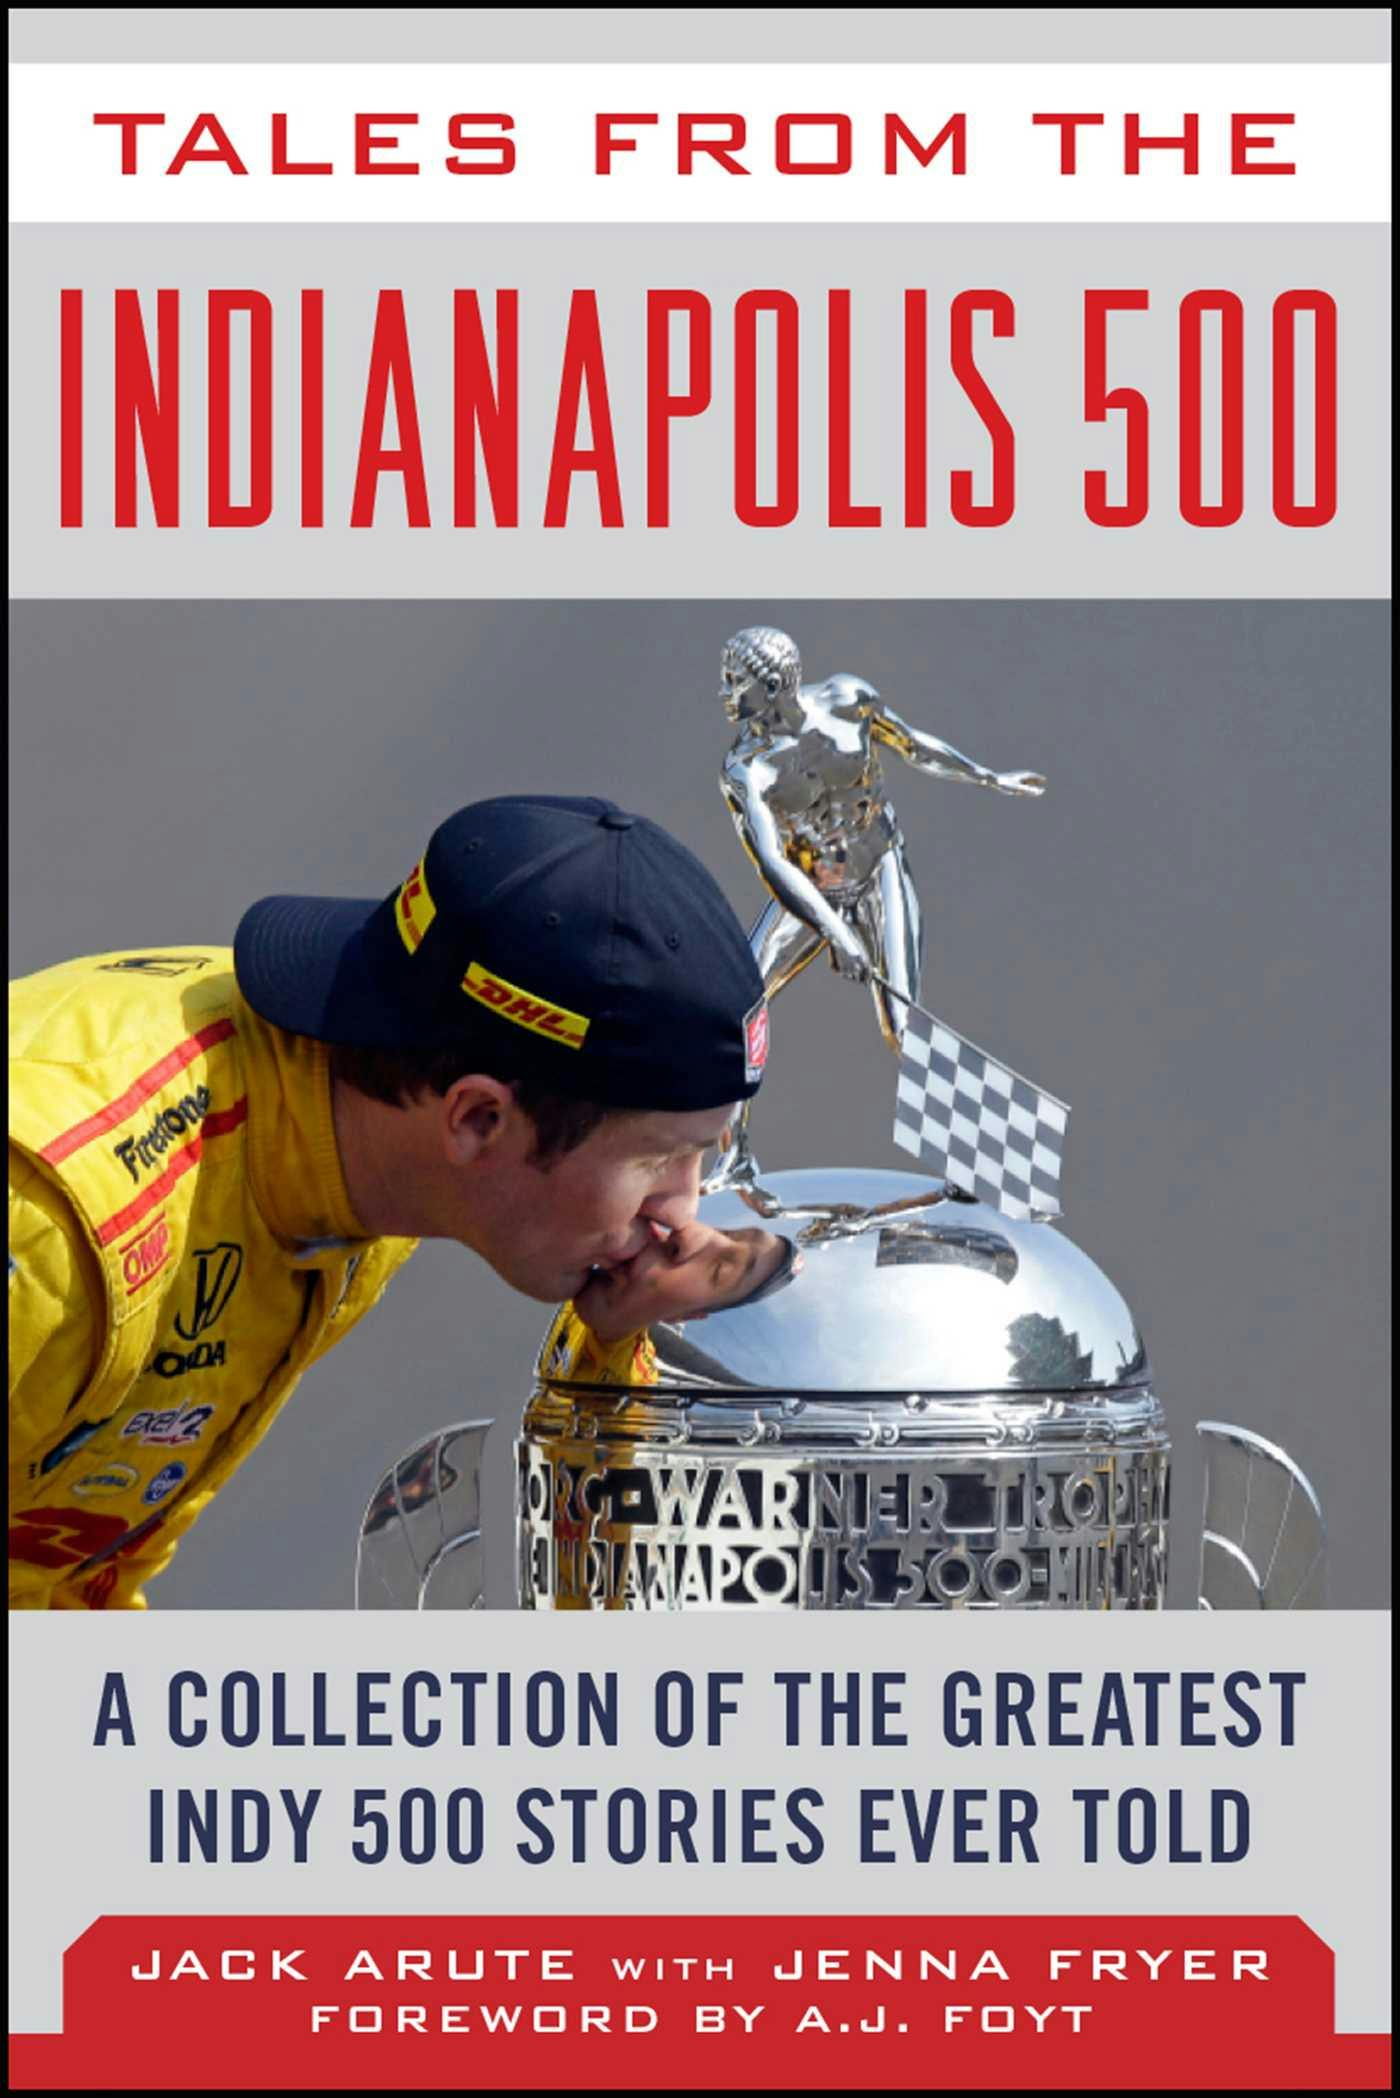 Tales from the Indianapolis 500: A Collection of the Greatest Indy 500 Stories Ever Told - Jenna Fryer, Jack Arute